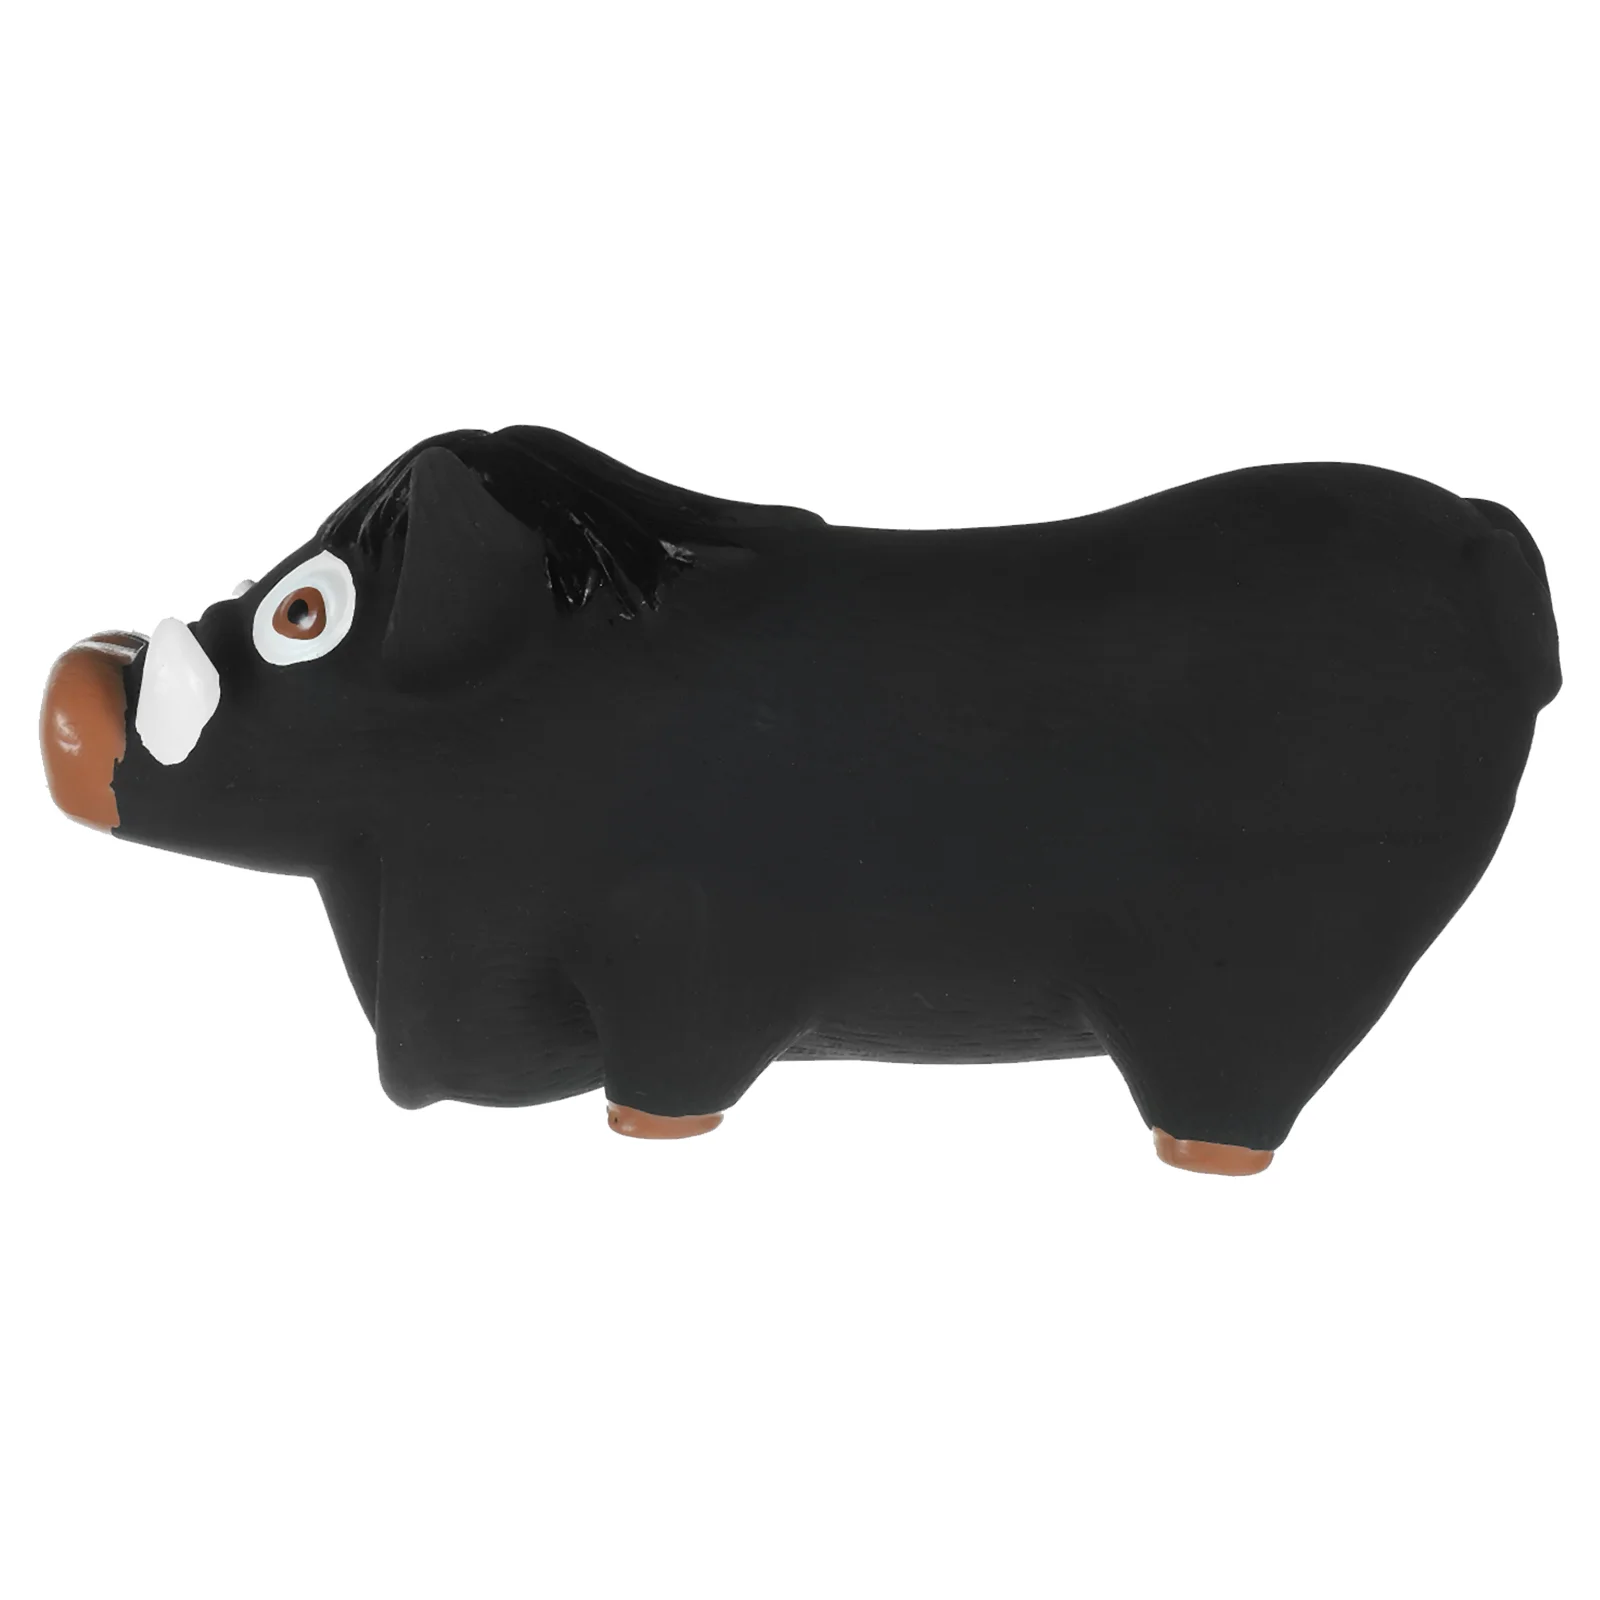 

Squeaky Dog Toy Pig Shape Pet Biting Toy Interactive Puppy Dog Toy Chewing Toy